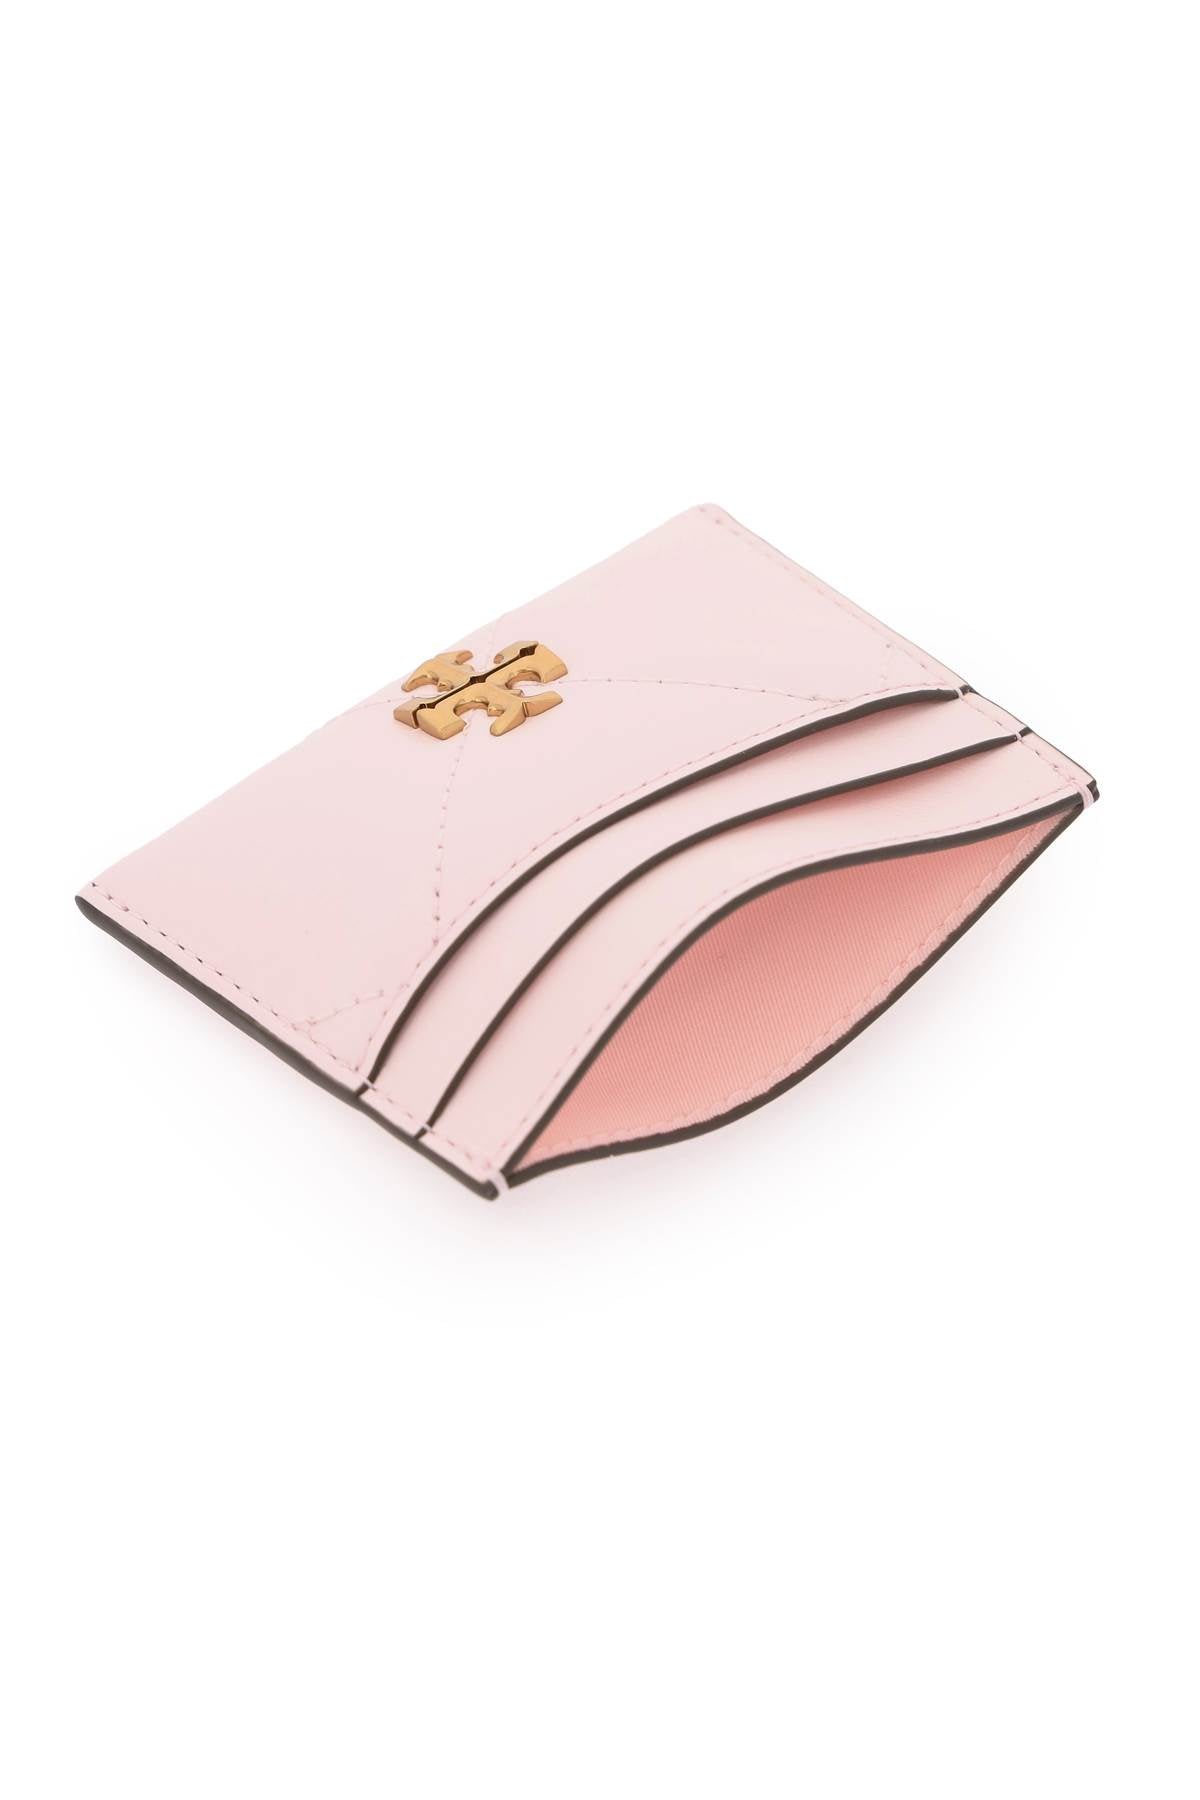 Tory burch kira card holder with trapezoid-1